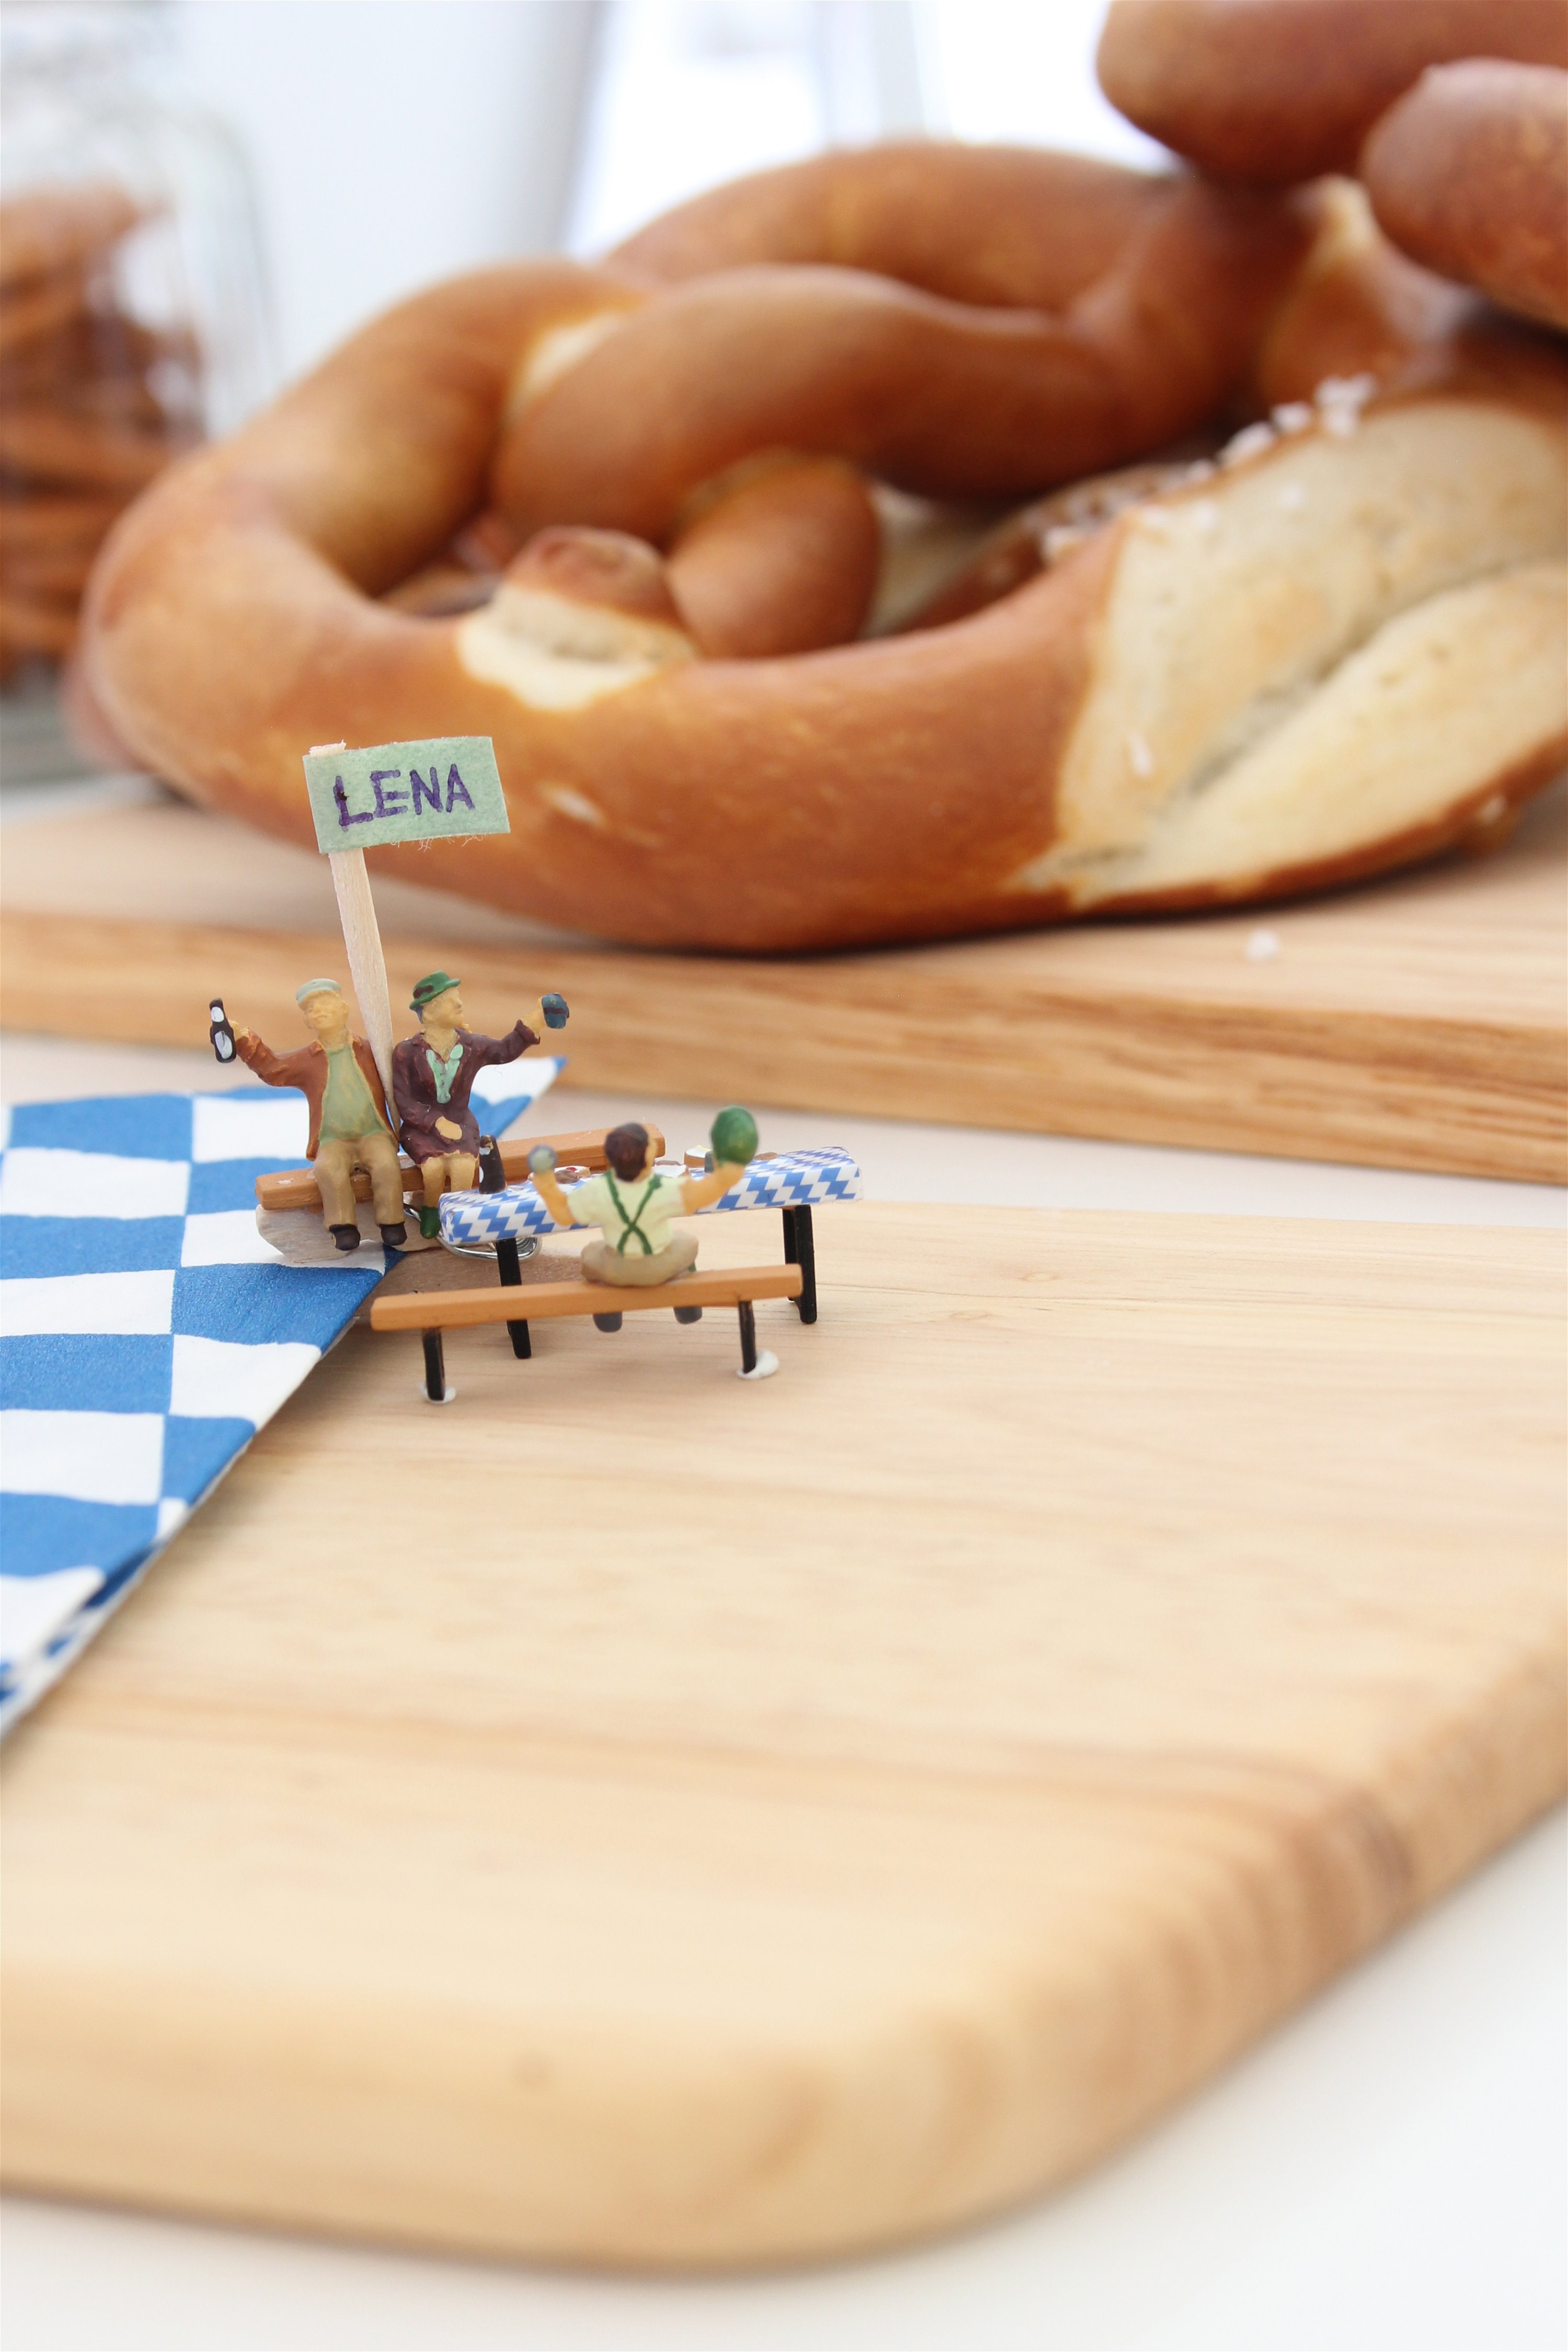 4) Pretzels, snacks and decorations in blue and white!